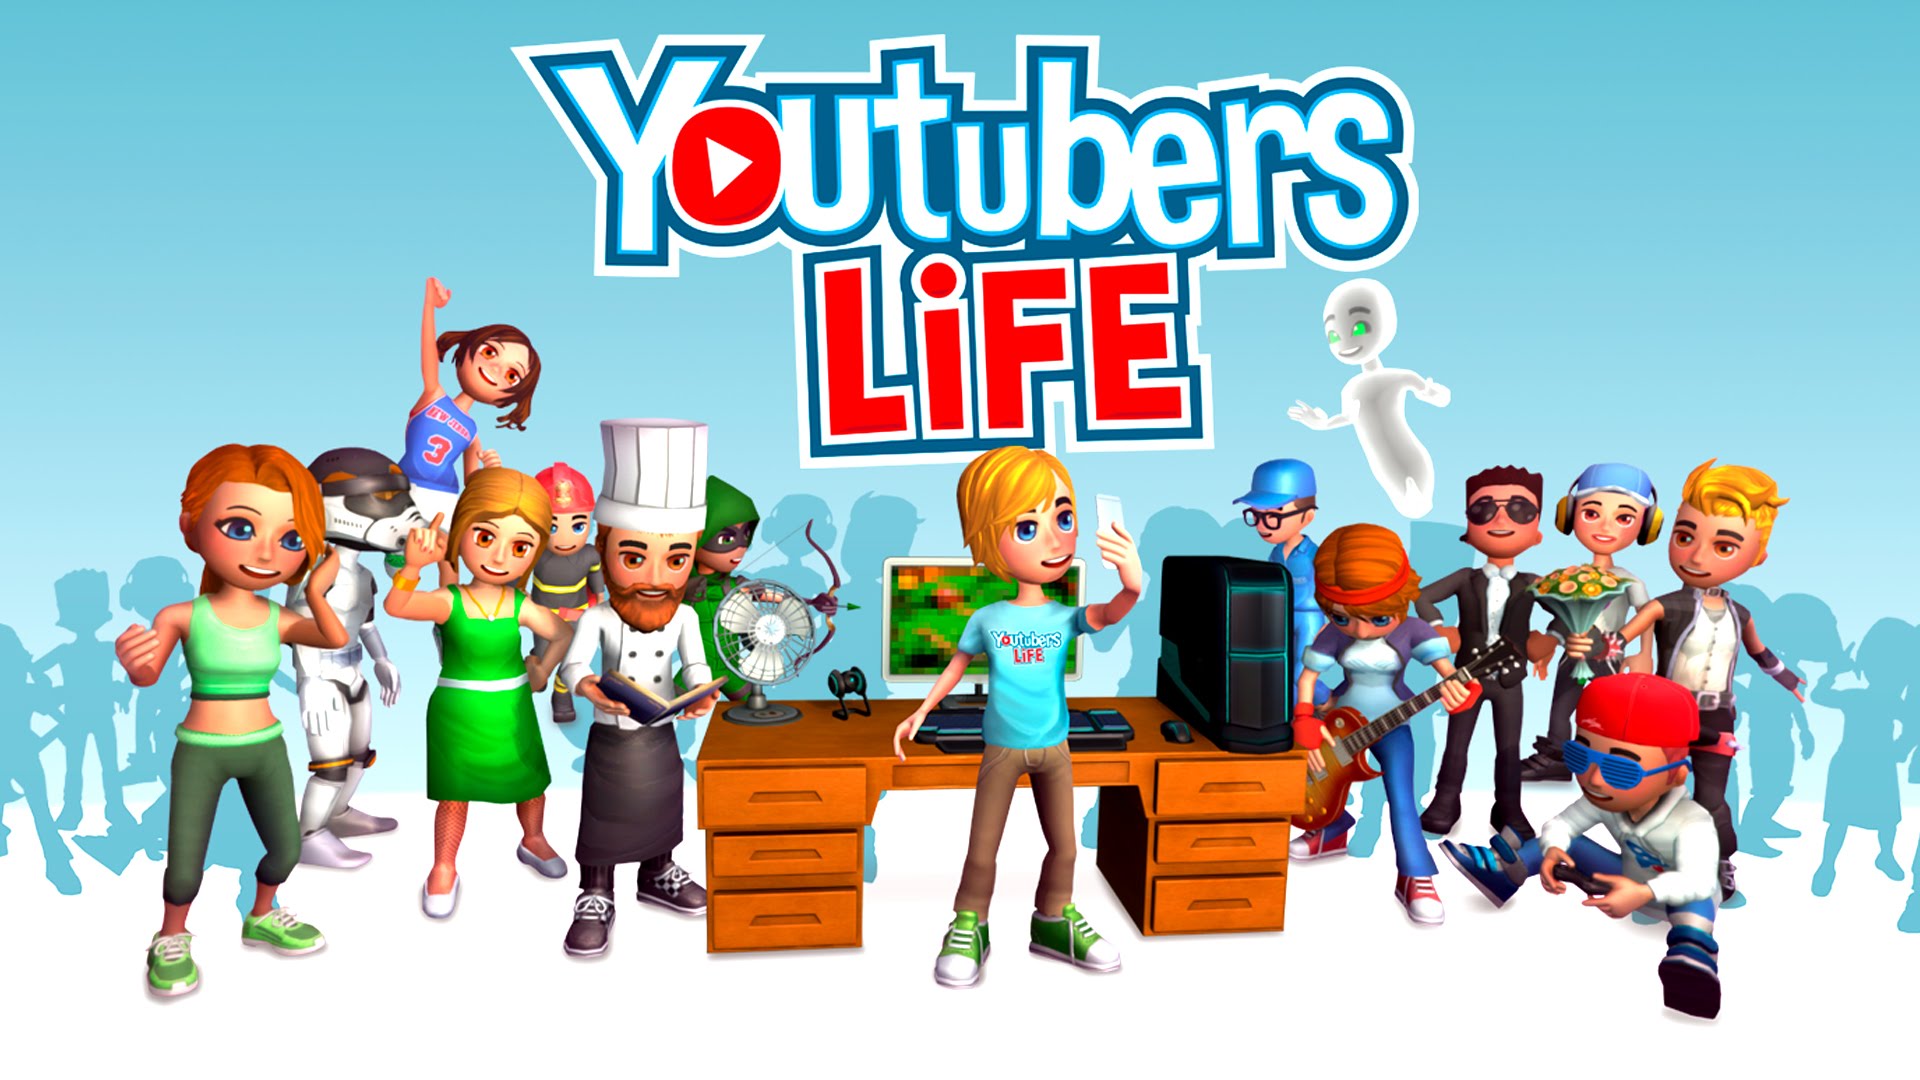 youtubers life download 2019 pc